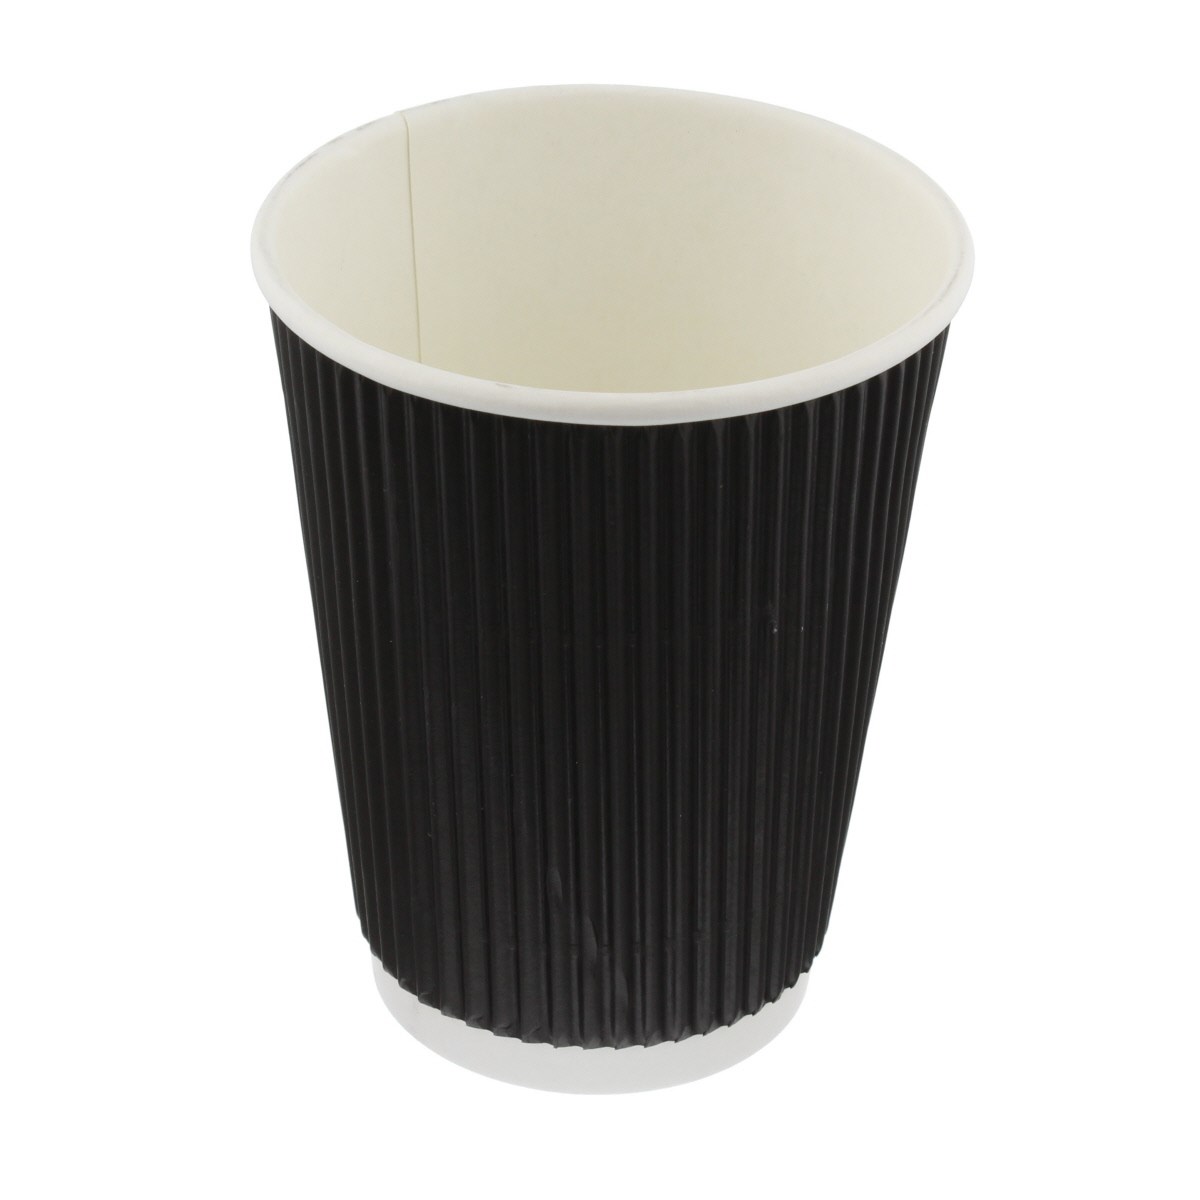 UK MANUFACTURER 1000 x 12oz BLACK 3-PLY RIPPLE DISPOSABLE PAPER COFFEE CUPS 